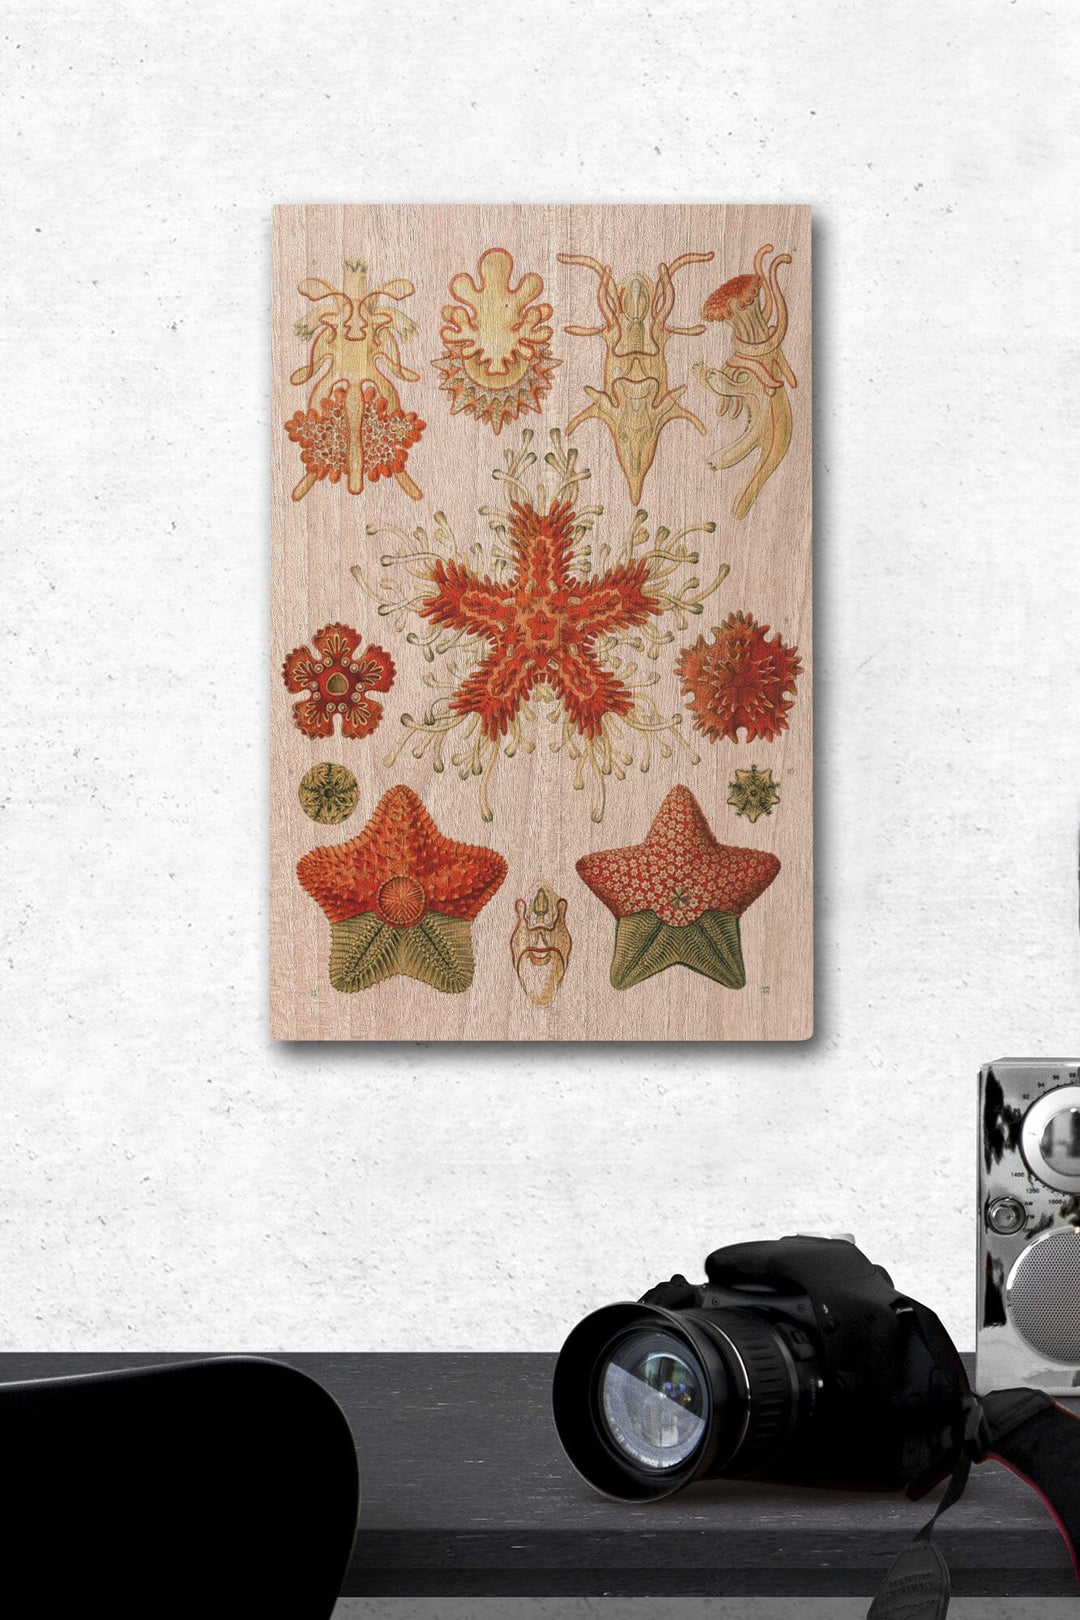 Art Forms of Nature, Asteridea, Ernst Haeckel Artwork, Wood Signs and Postcards Wood Lantern Press 12 x 18 Wood Gallery Print 